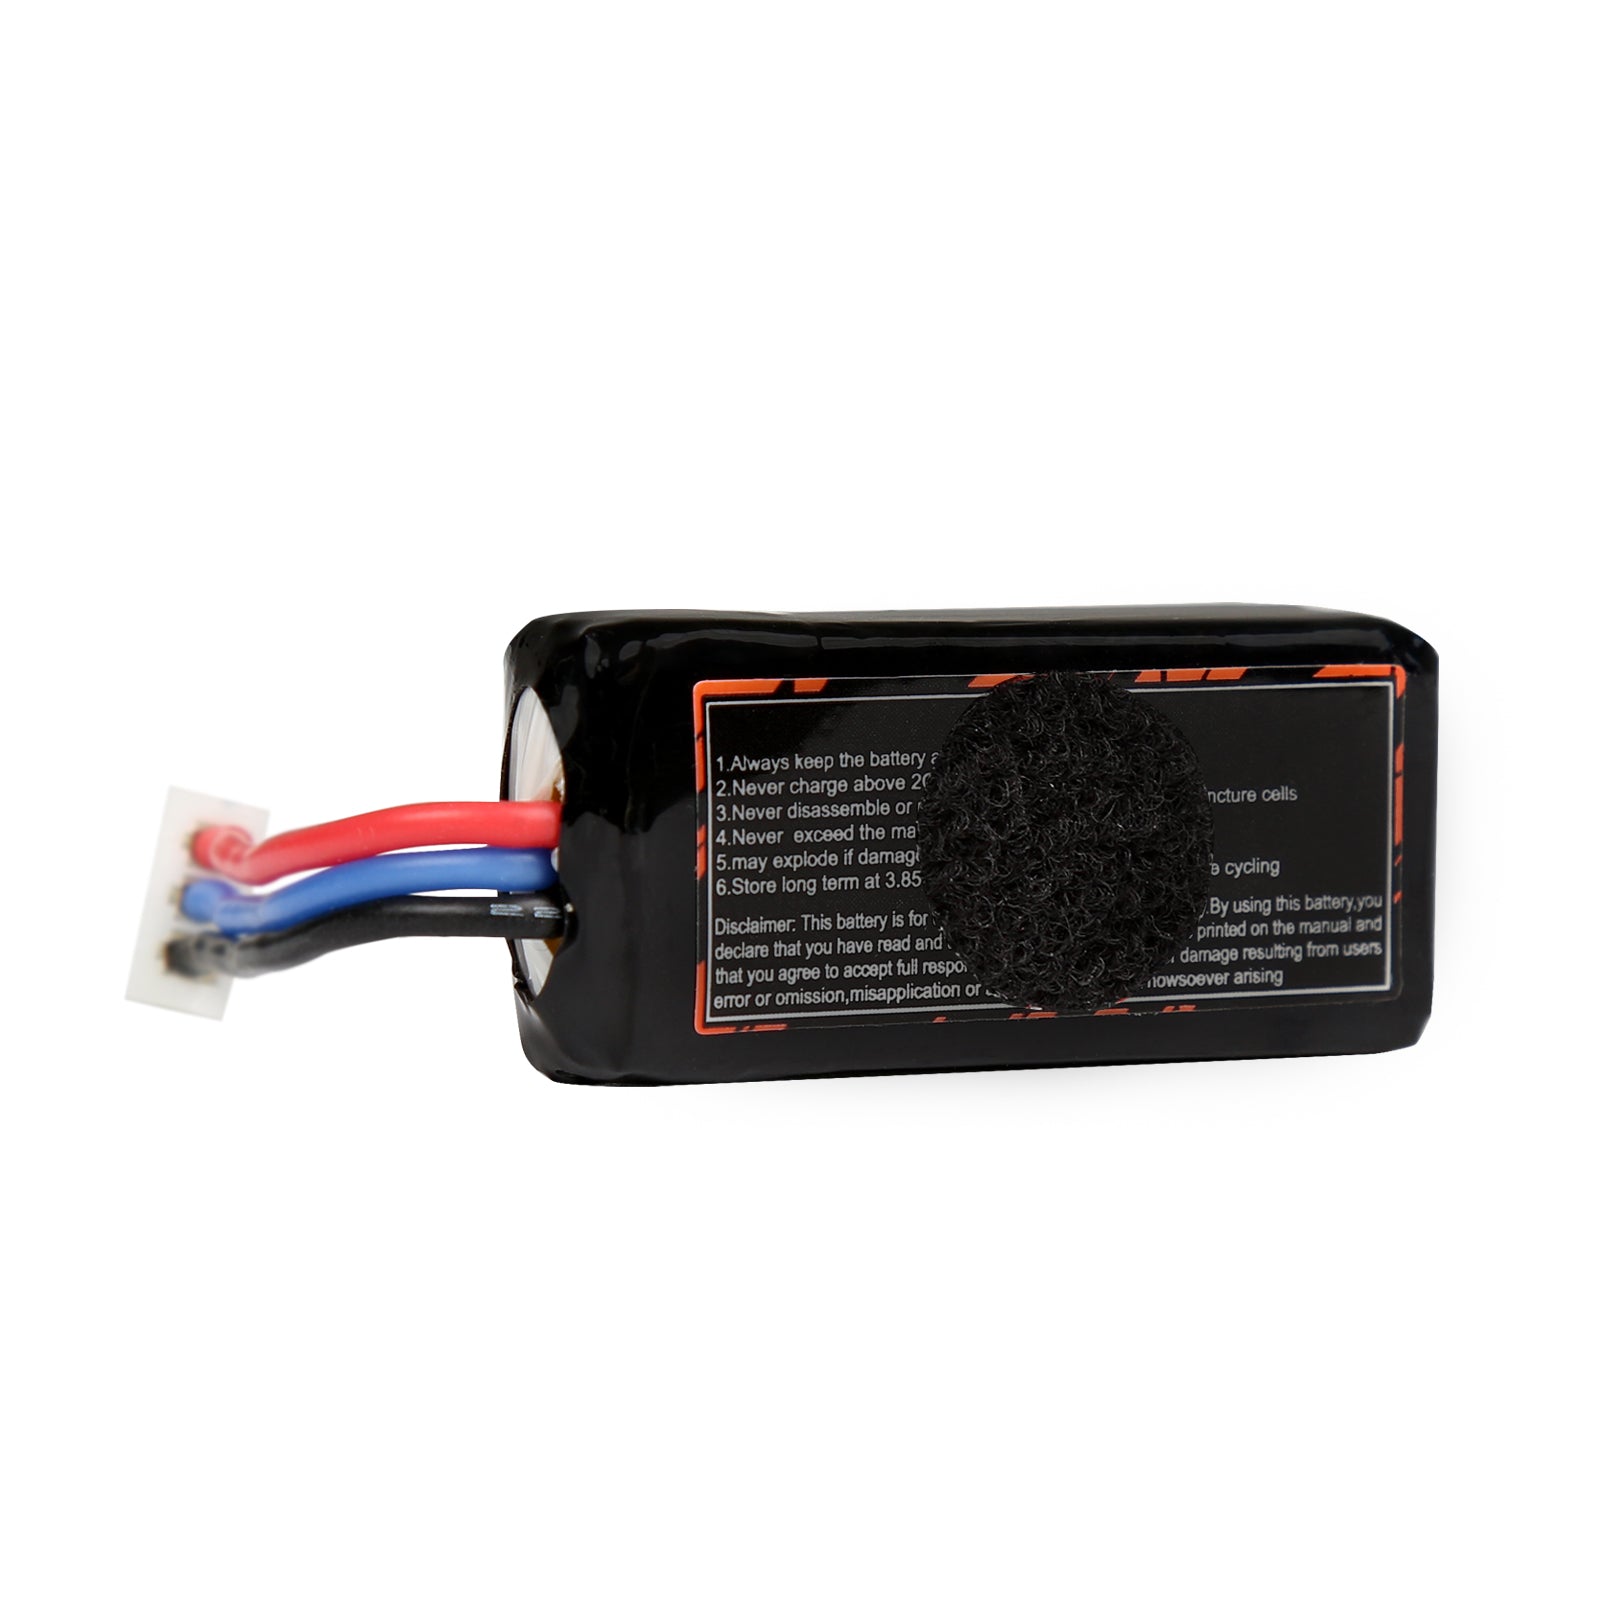 OMPHOBBY 25C 2S 300mAh Battery or Battery Charger Compatible with S720 T720 & Others